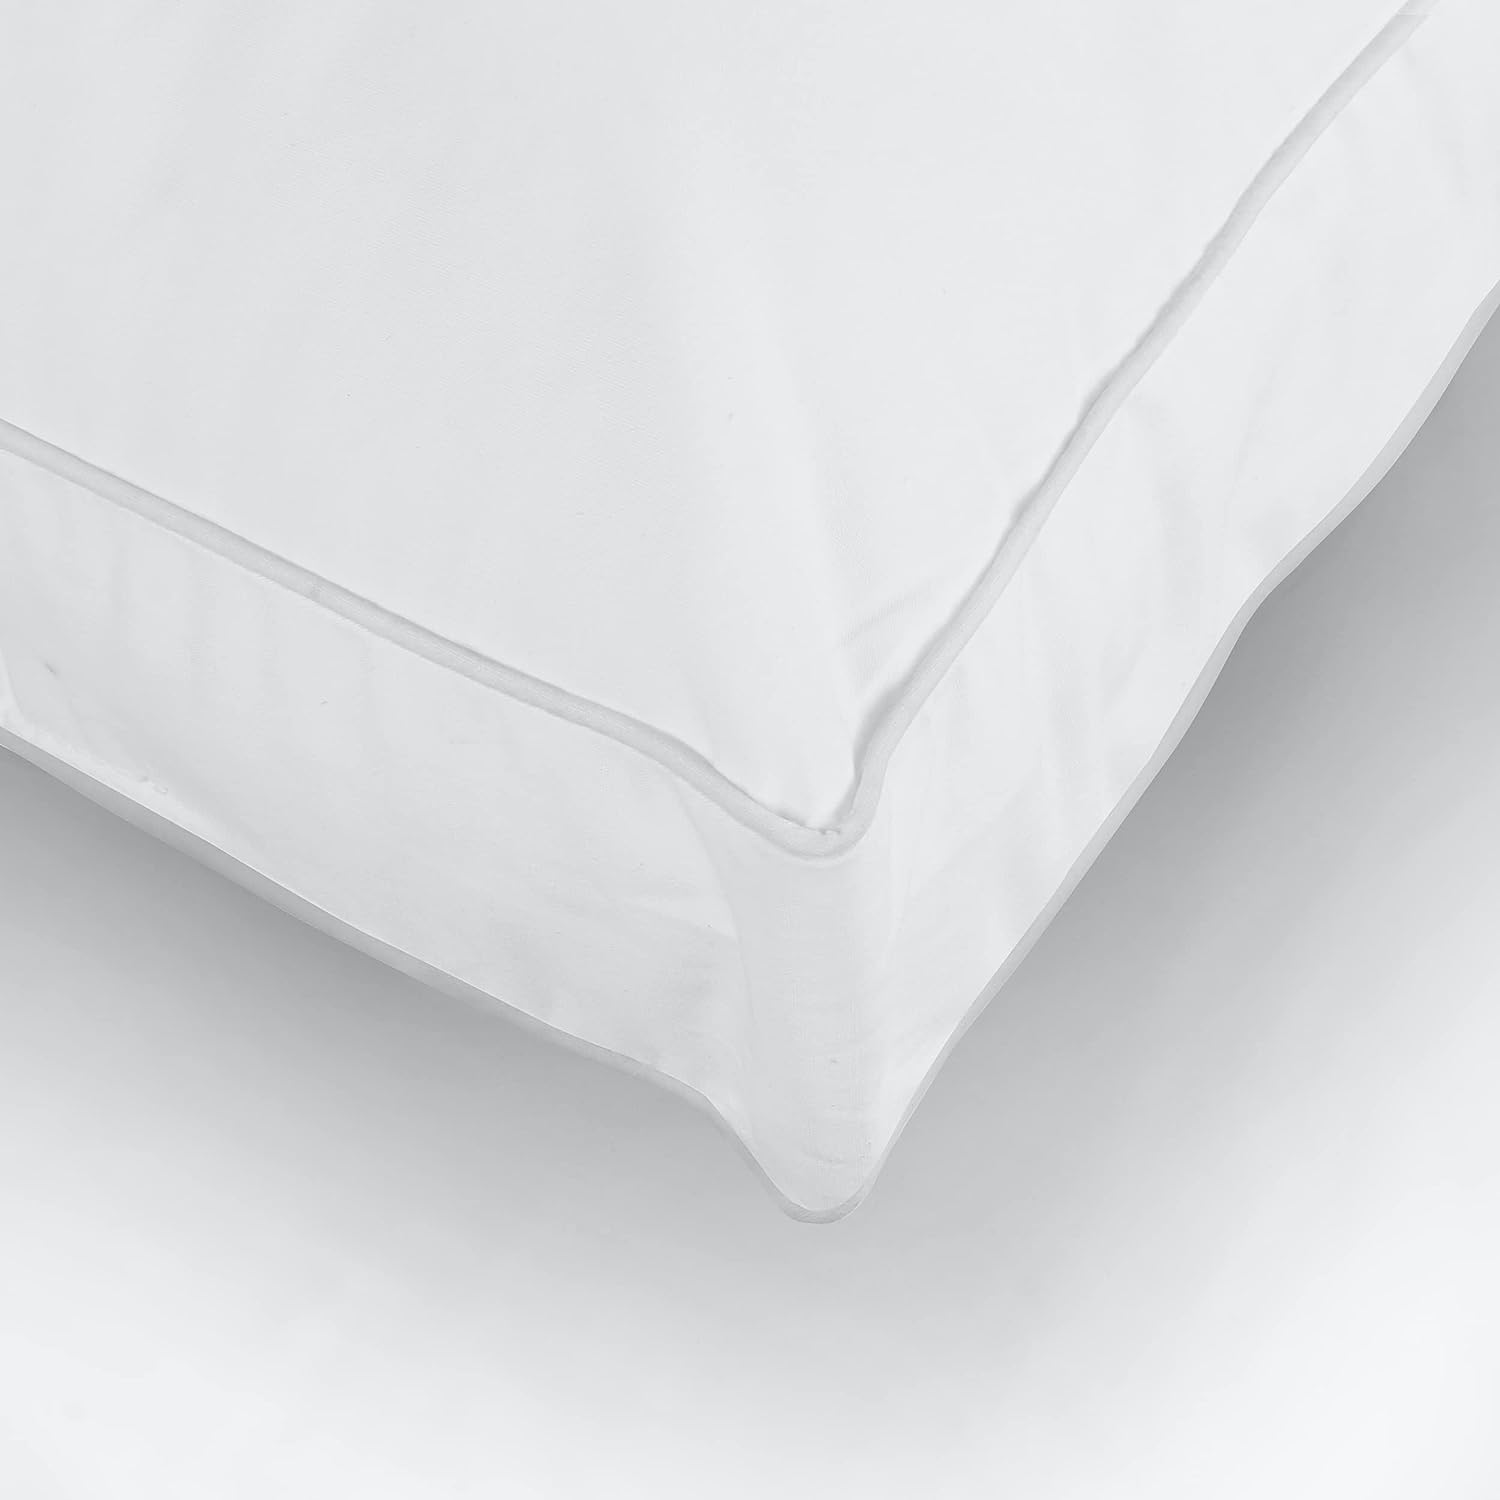 Utopia Bedding UB1535 Pillow Review - Consumer Reports